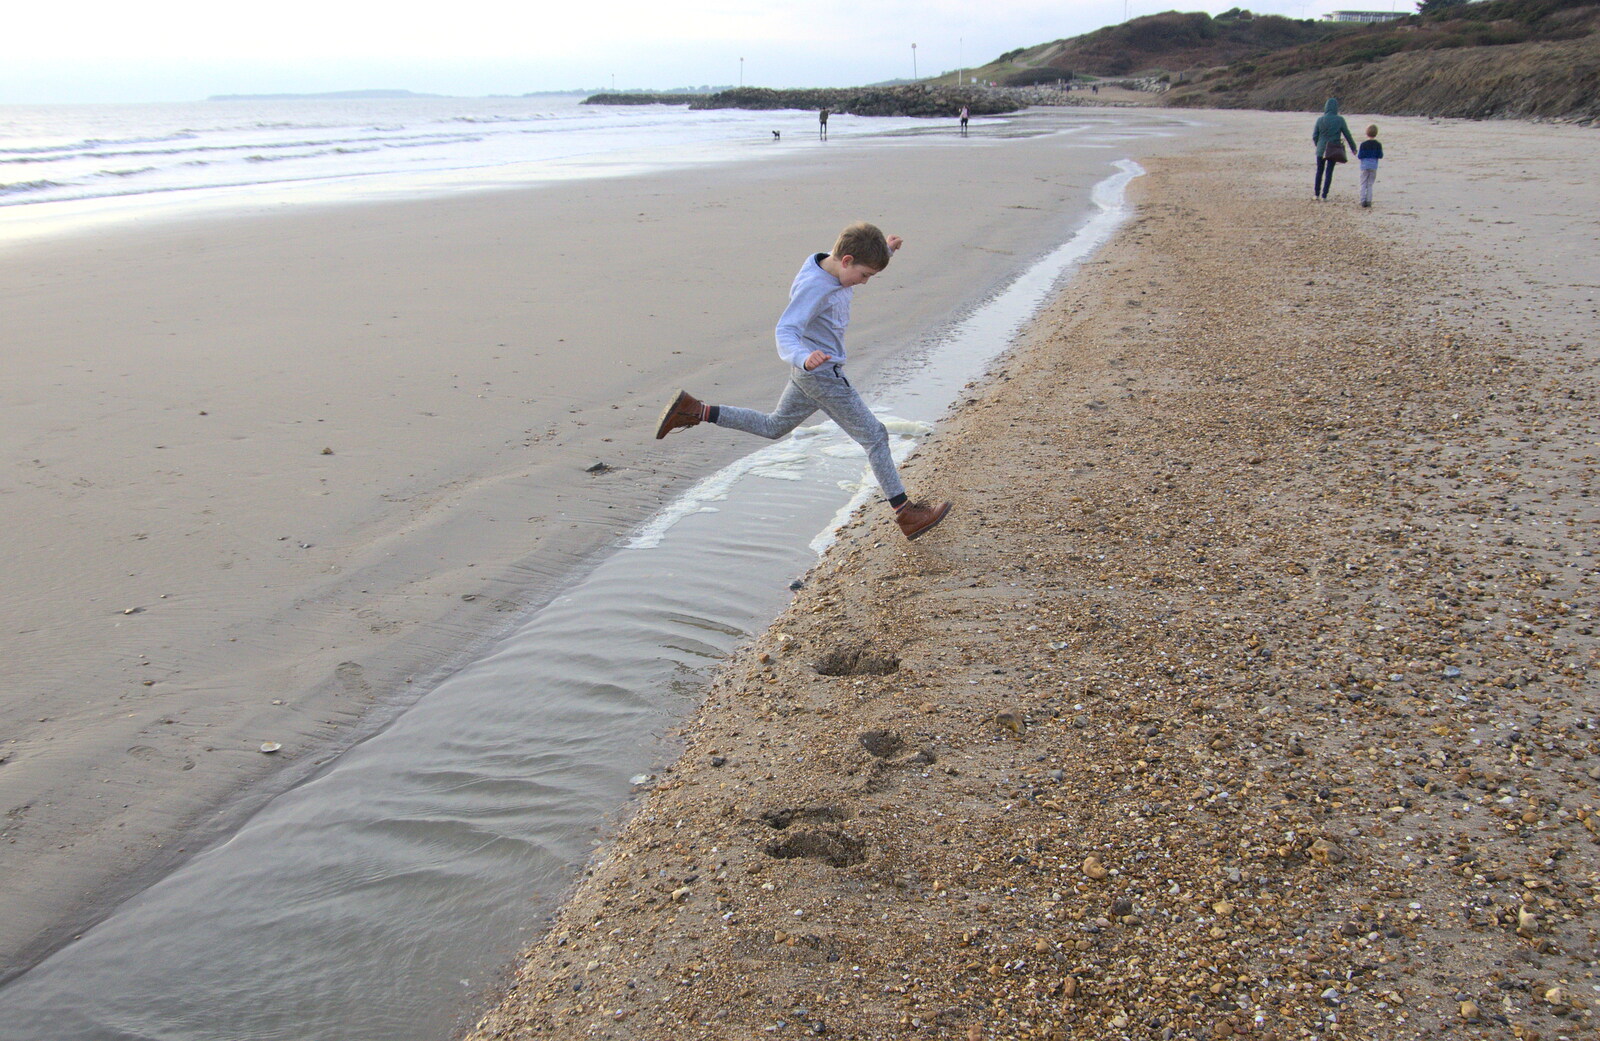 Fred leaps over a strip of water from Thanksgiving in Highcliffe, Dorset - 23rd November 2018